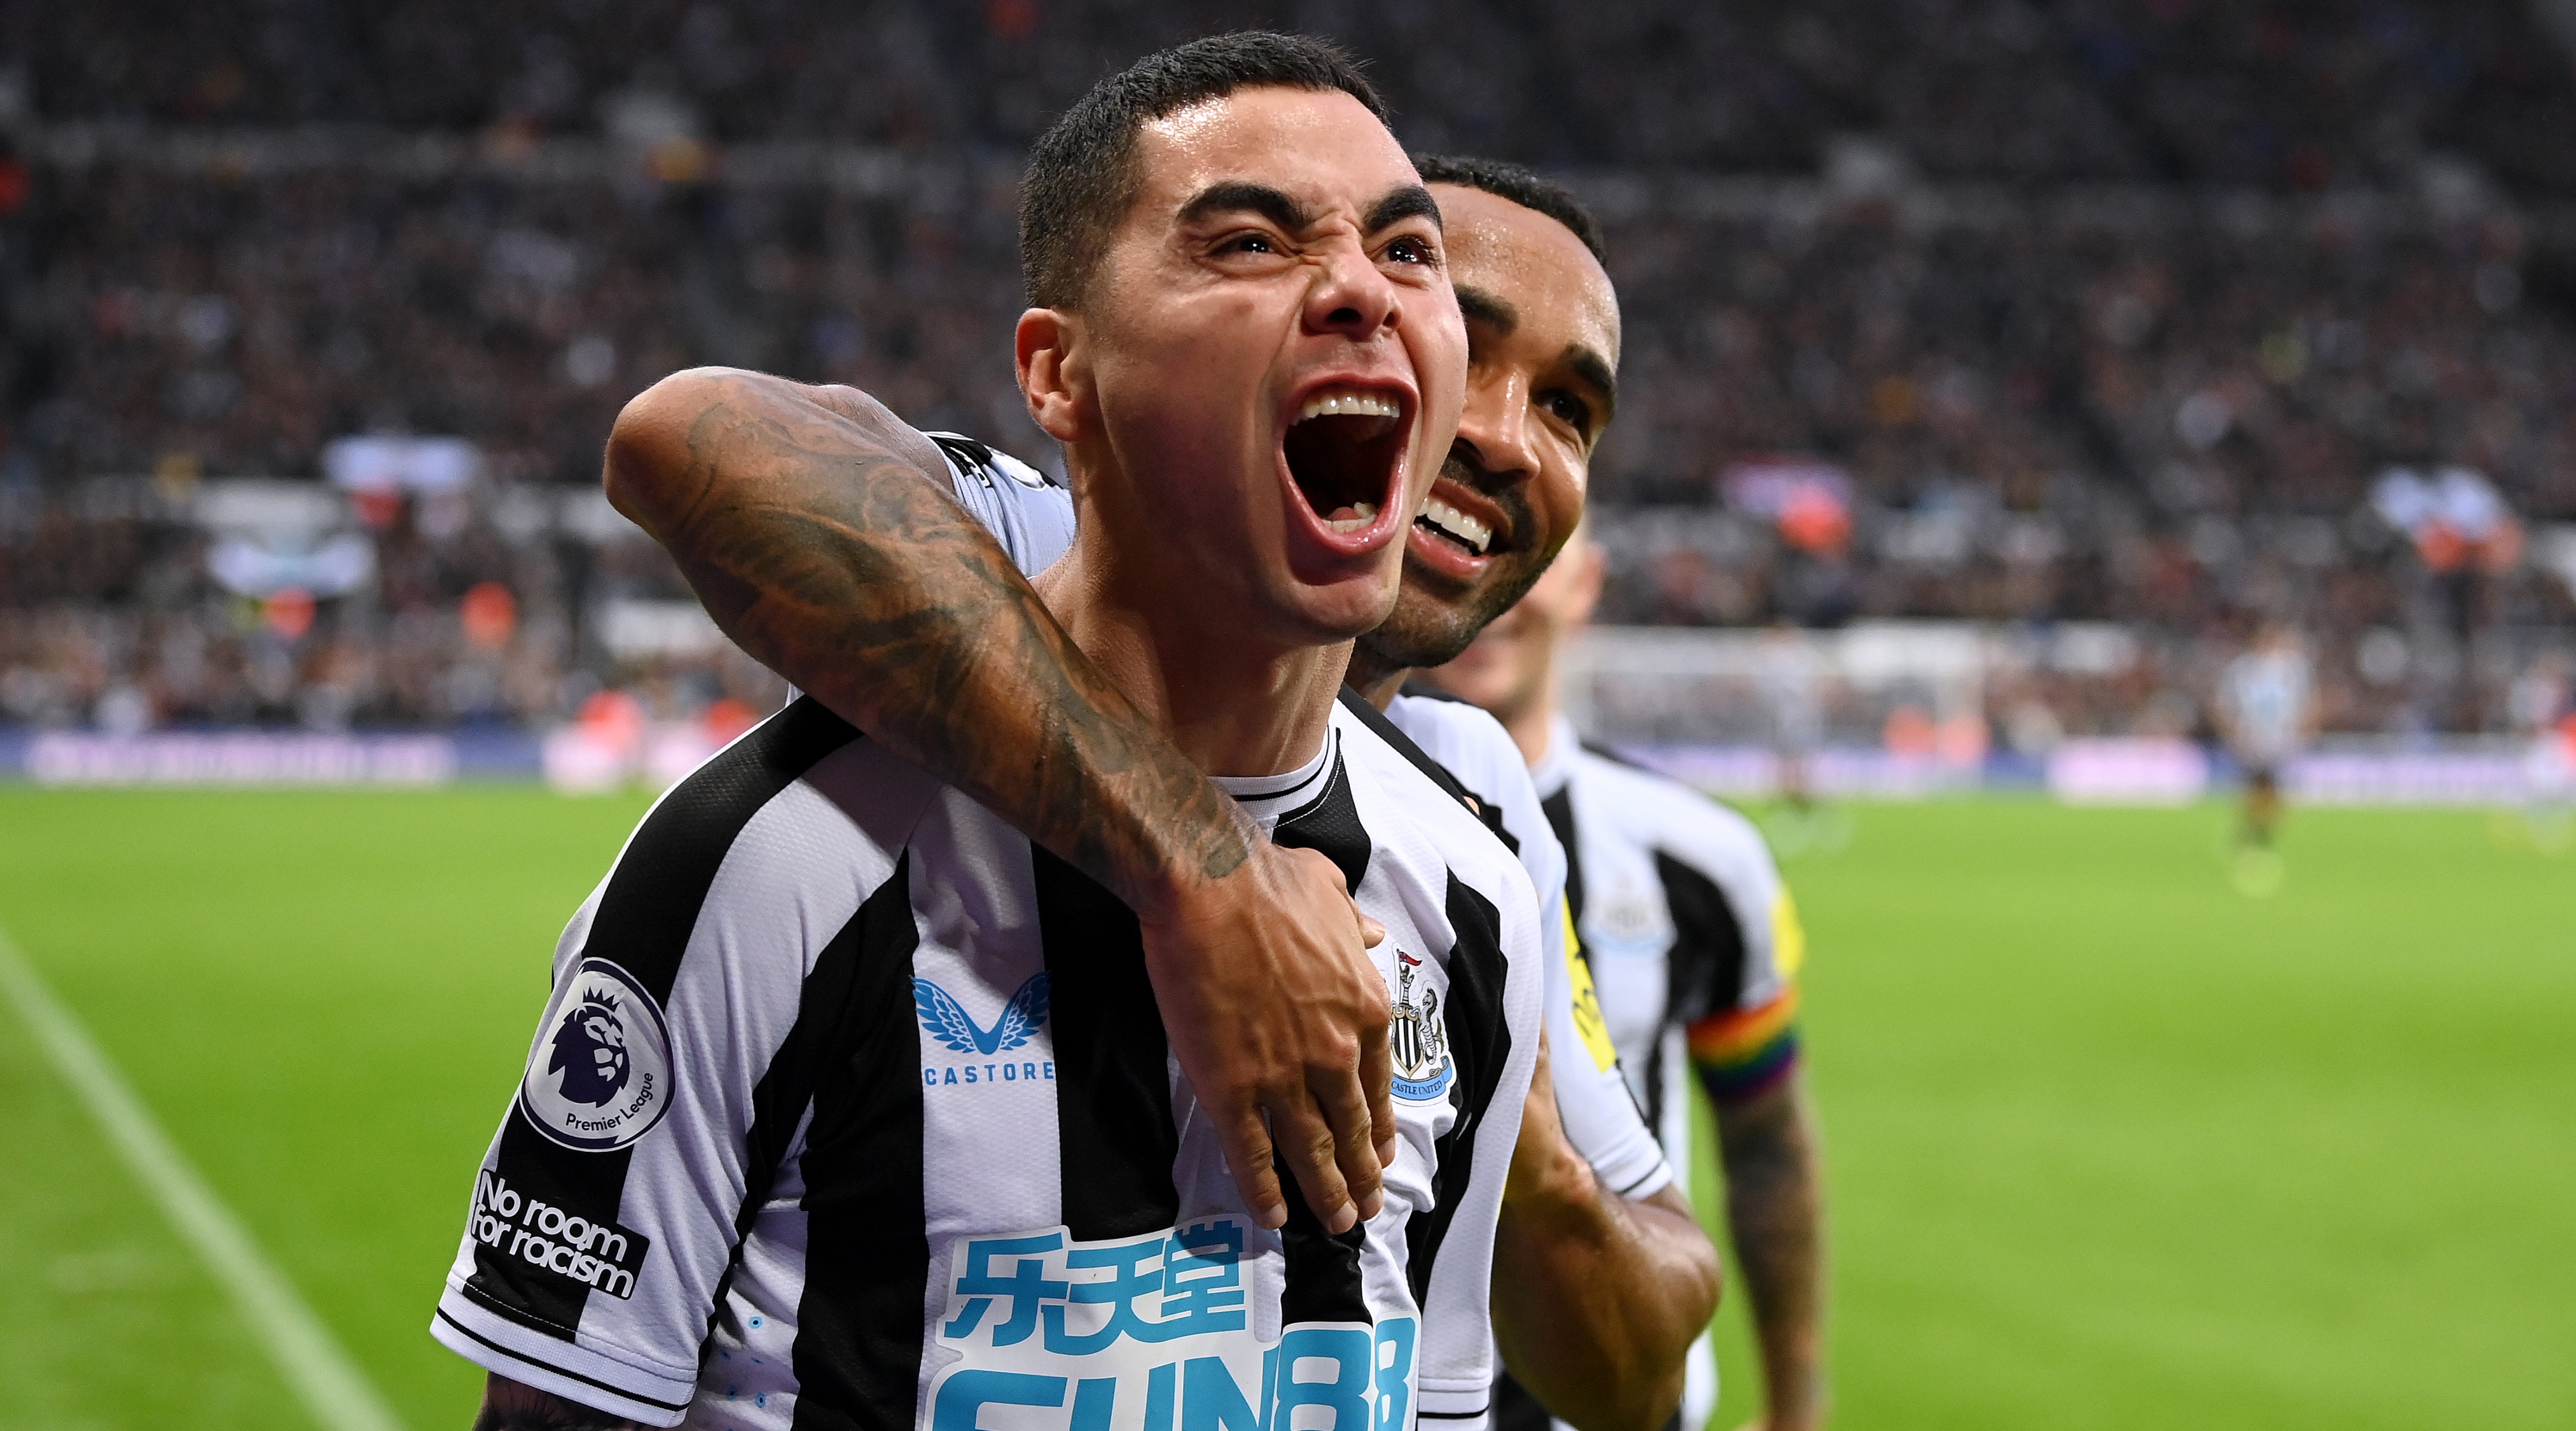 Newcastle striker Miguel Almiron celebrates with team mate Callum Wilson after scoring his team's fourth goal during the Premier League match between Newcastle United and Aston Villa on October 29, 2022 at St. James' Park, Newcastle, UK